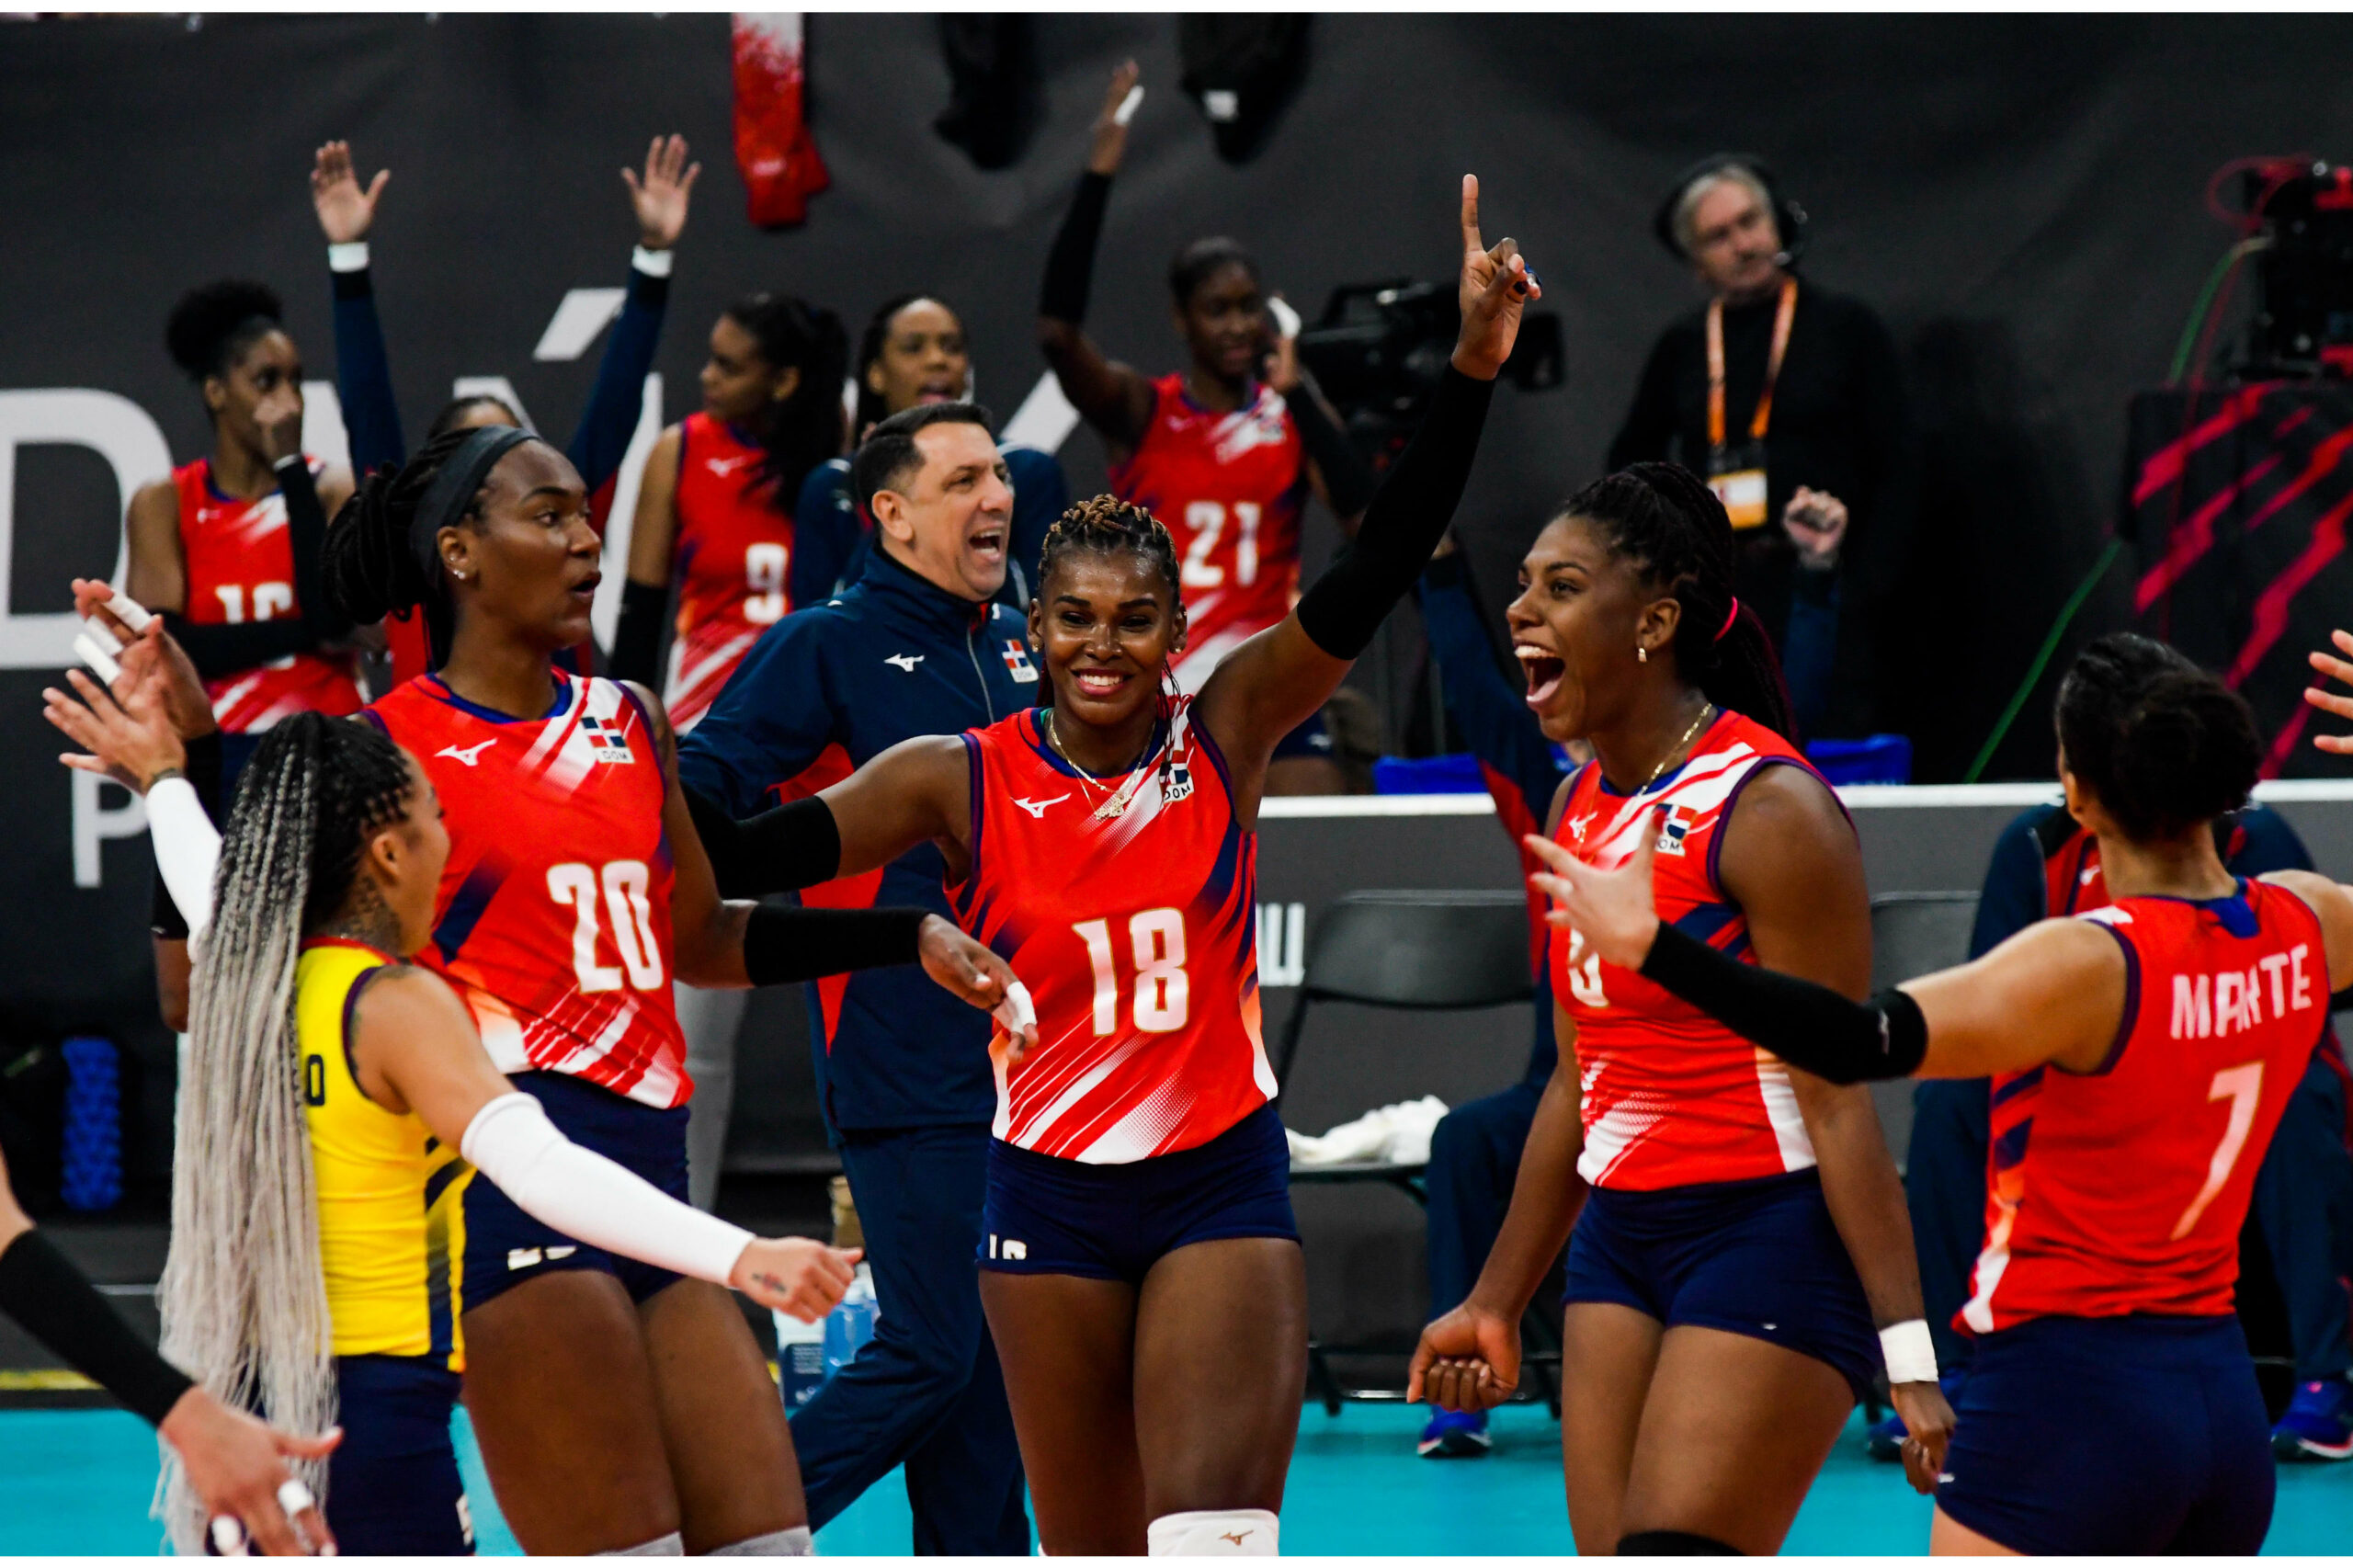 Dominican Republic beats Poland in Women’s Volleyball World Championship